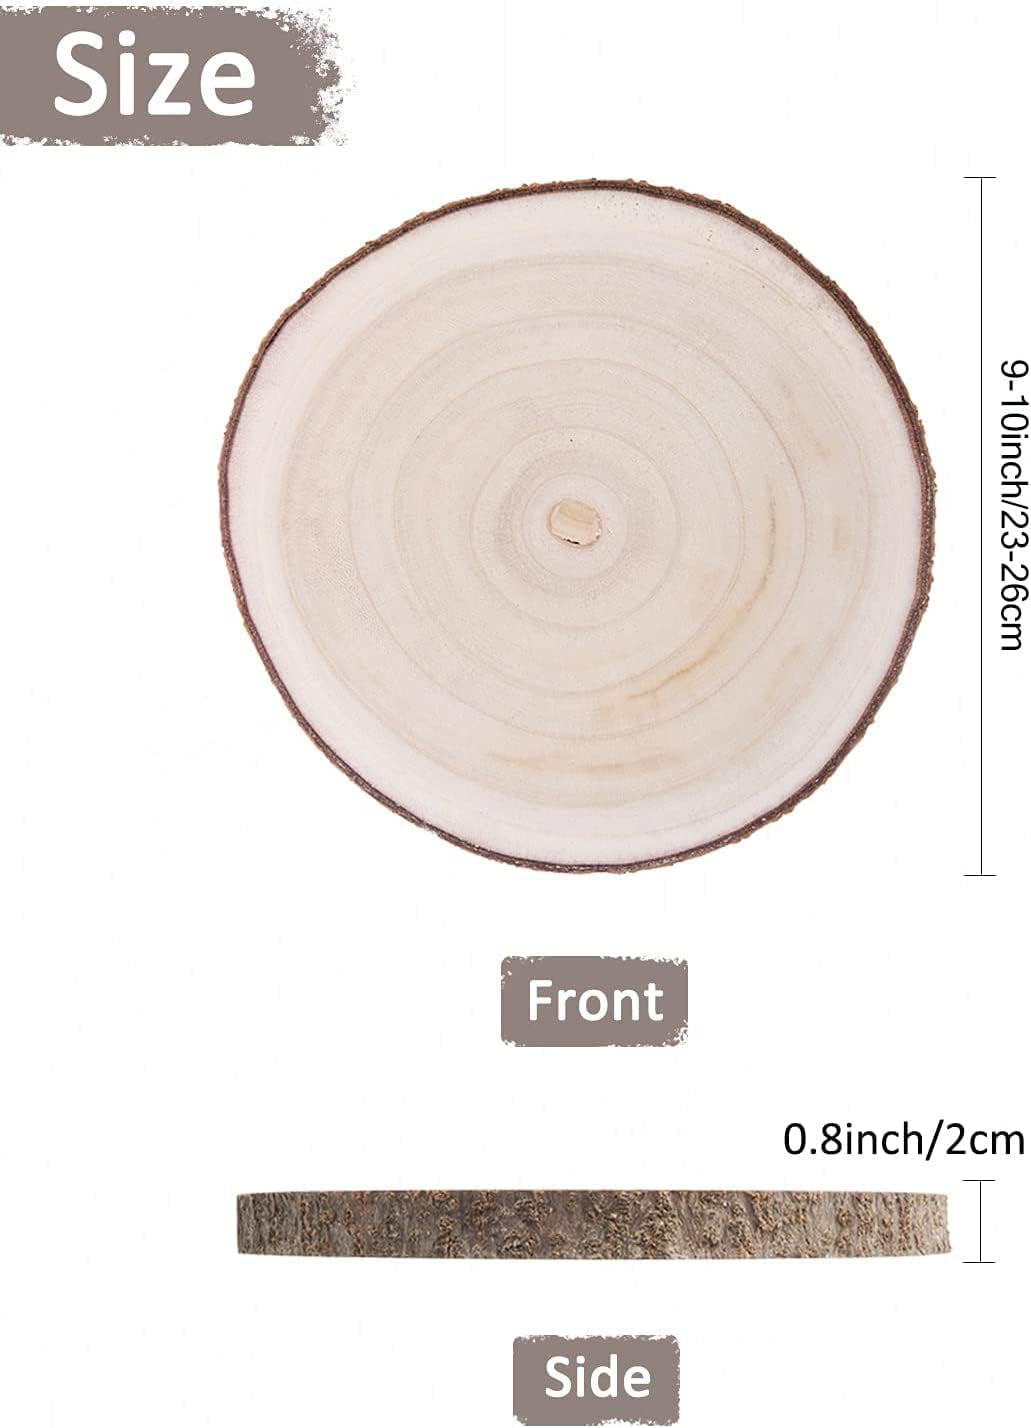 Pllieay 8 Pack 8-9 Inch Round Rustic Wood Slices for Weddings